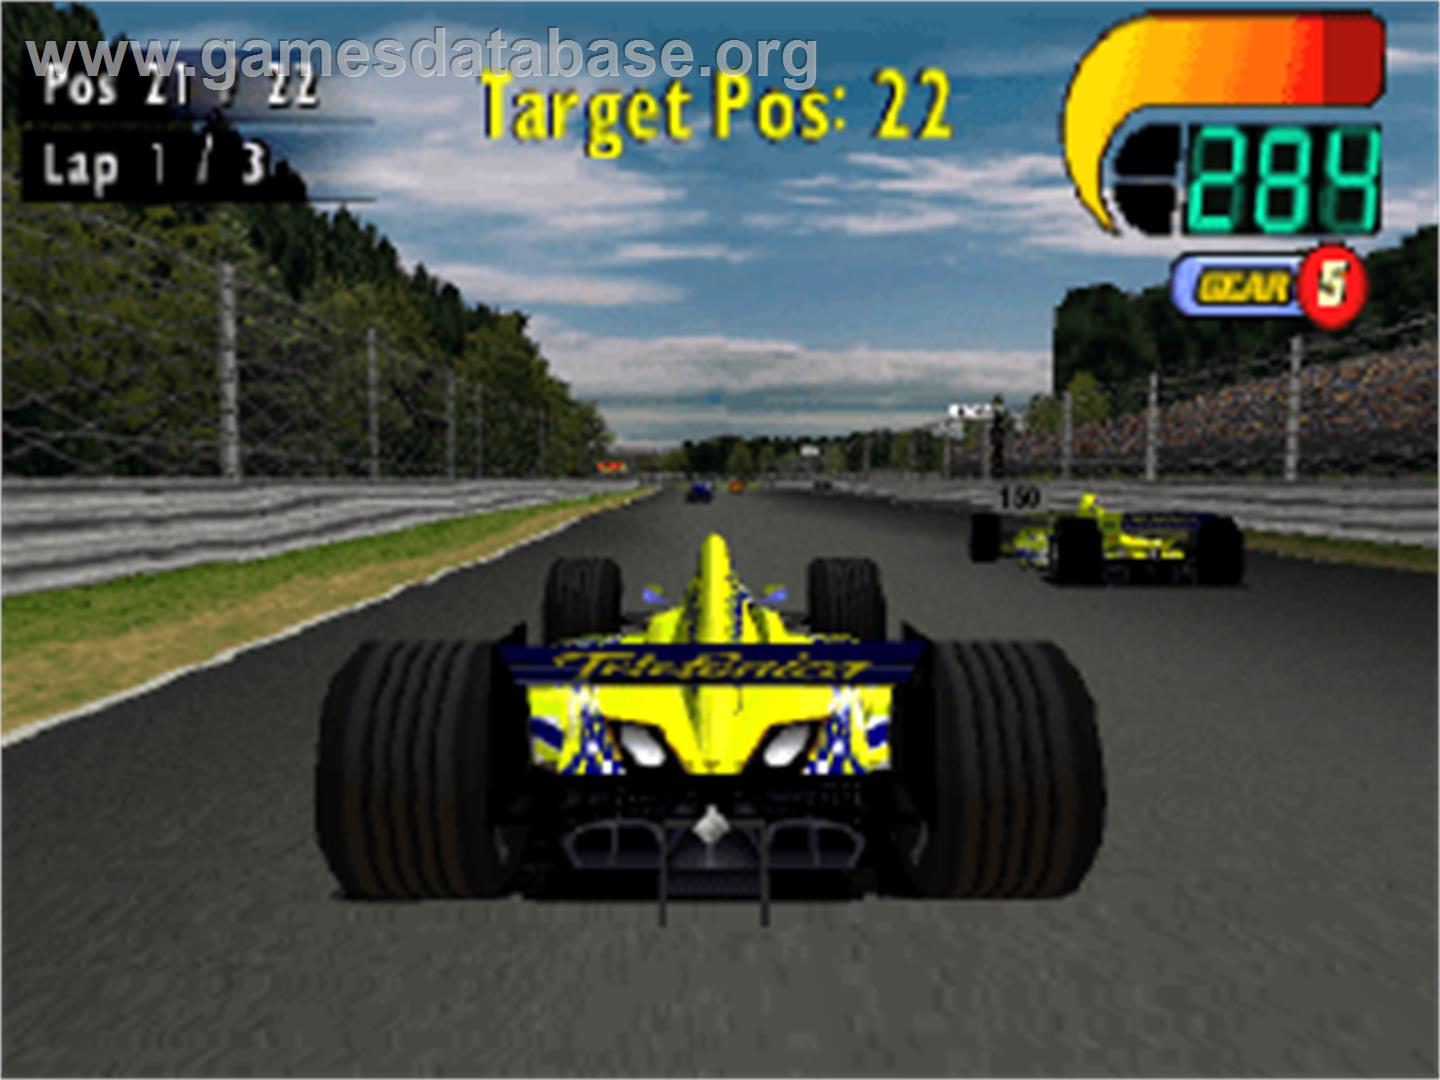 F1 World Grand Prix 2000 - Sony Playstation - Artwork - In Game